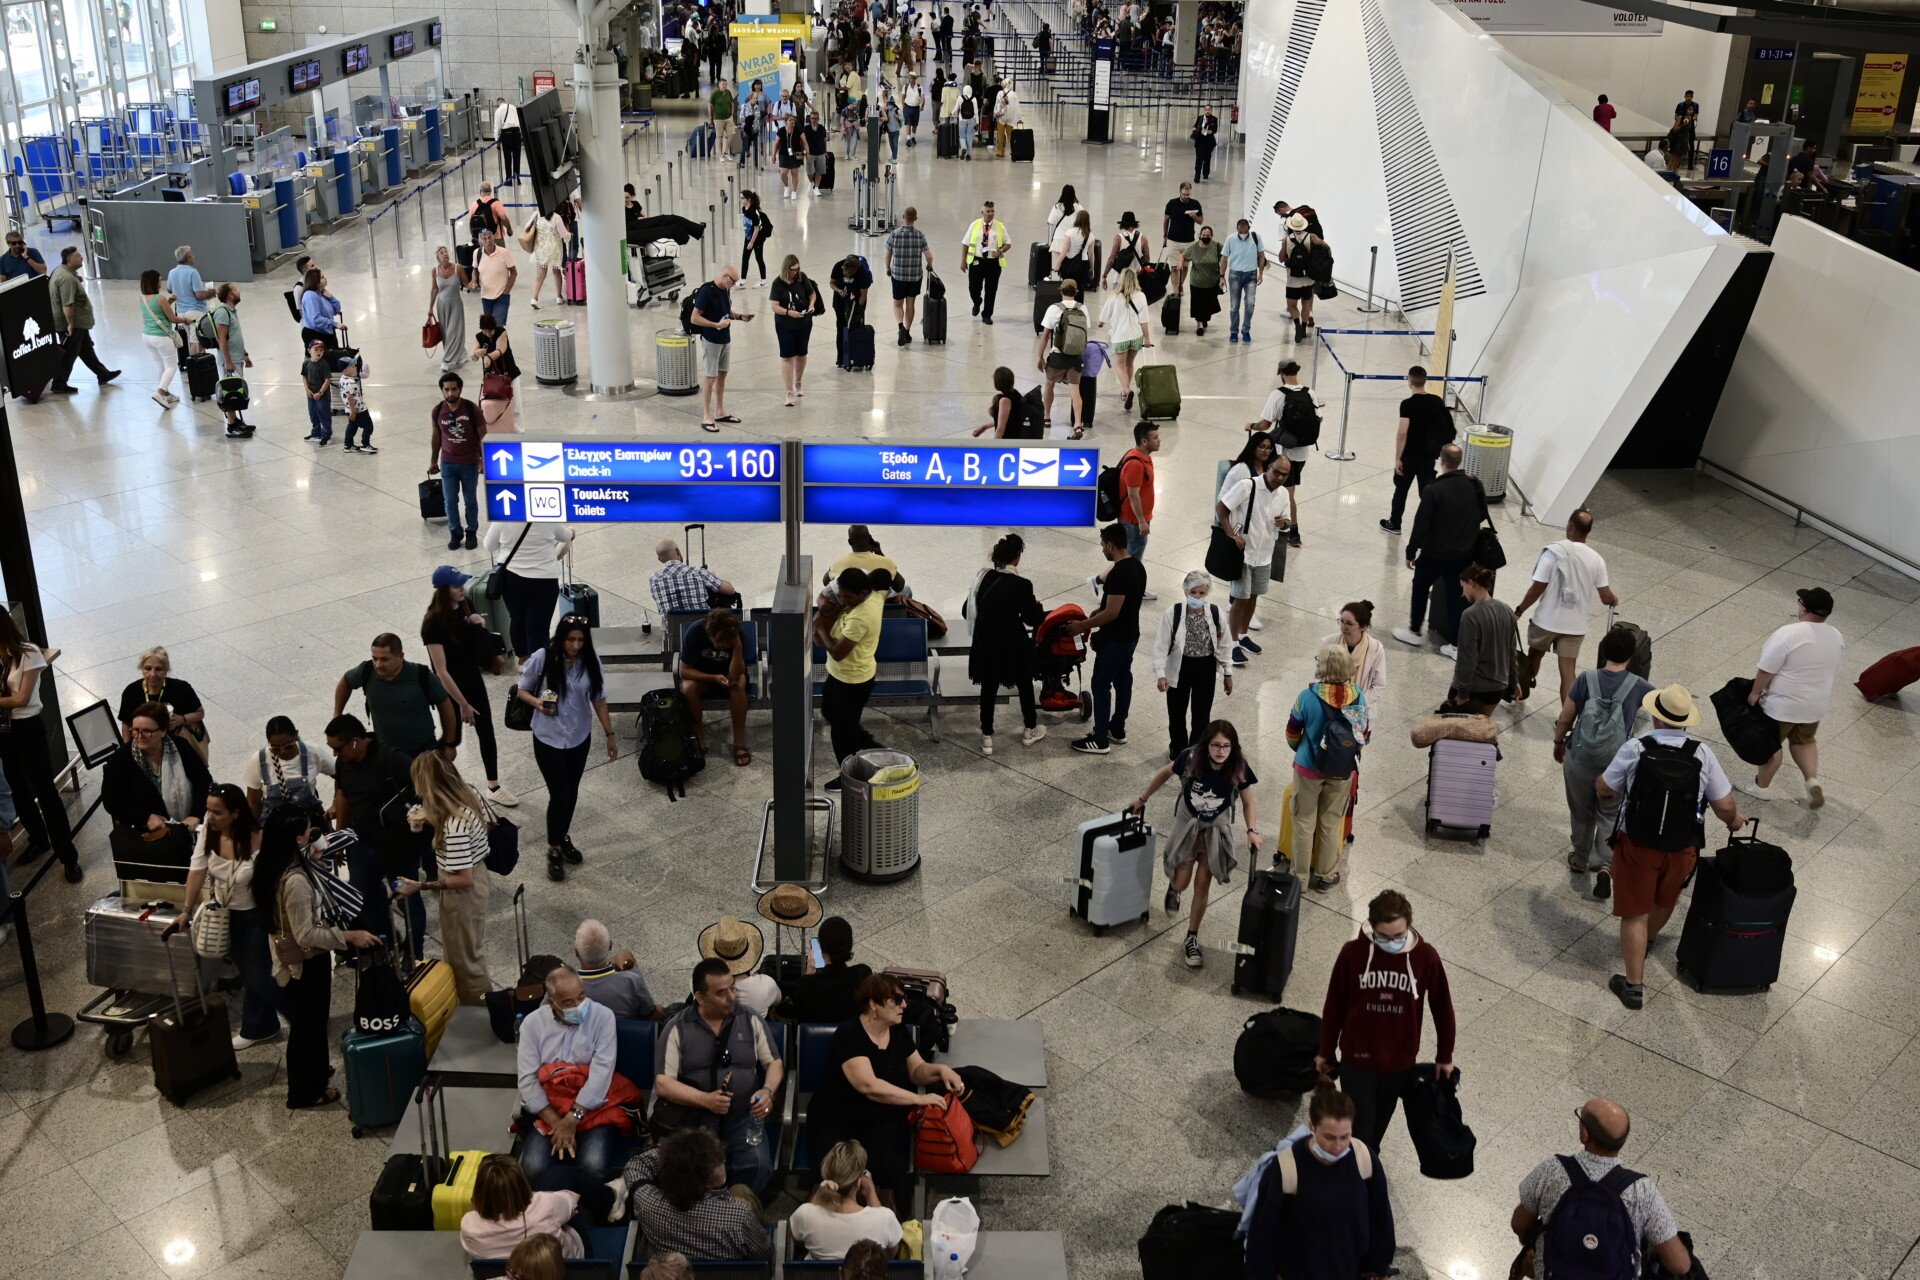 Travel receipts jump to 372 3 million euros in March